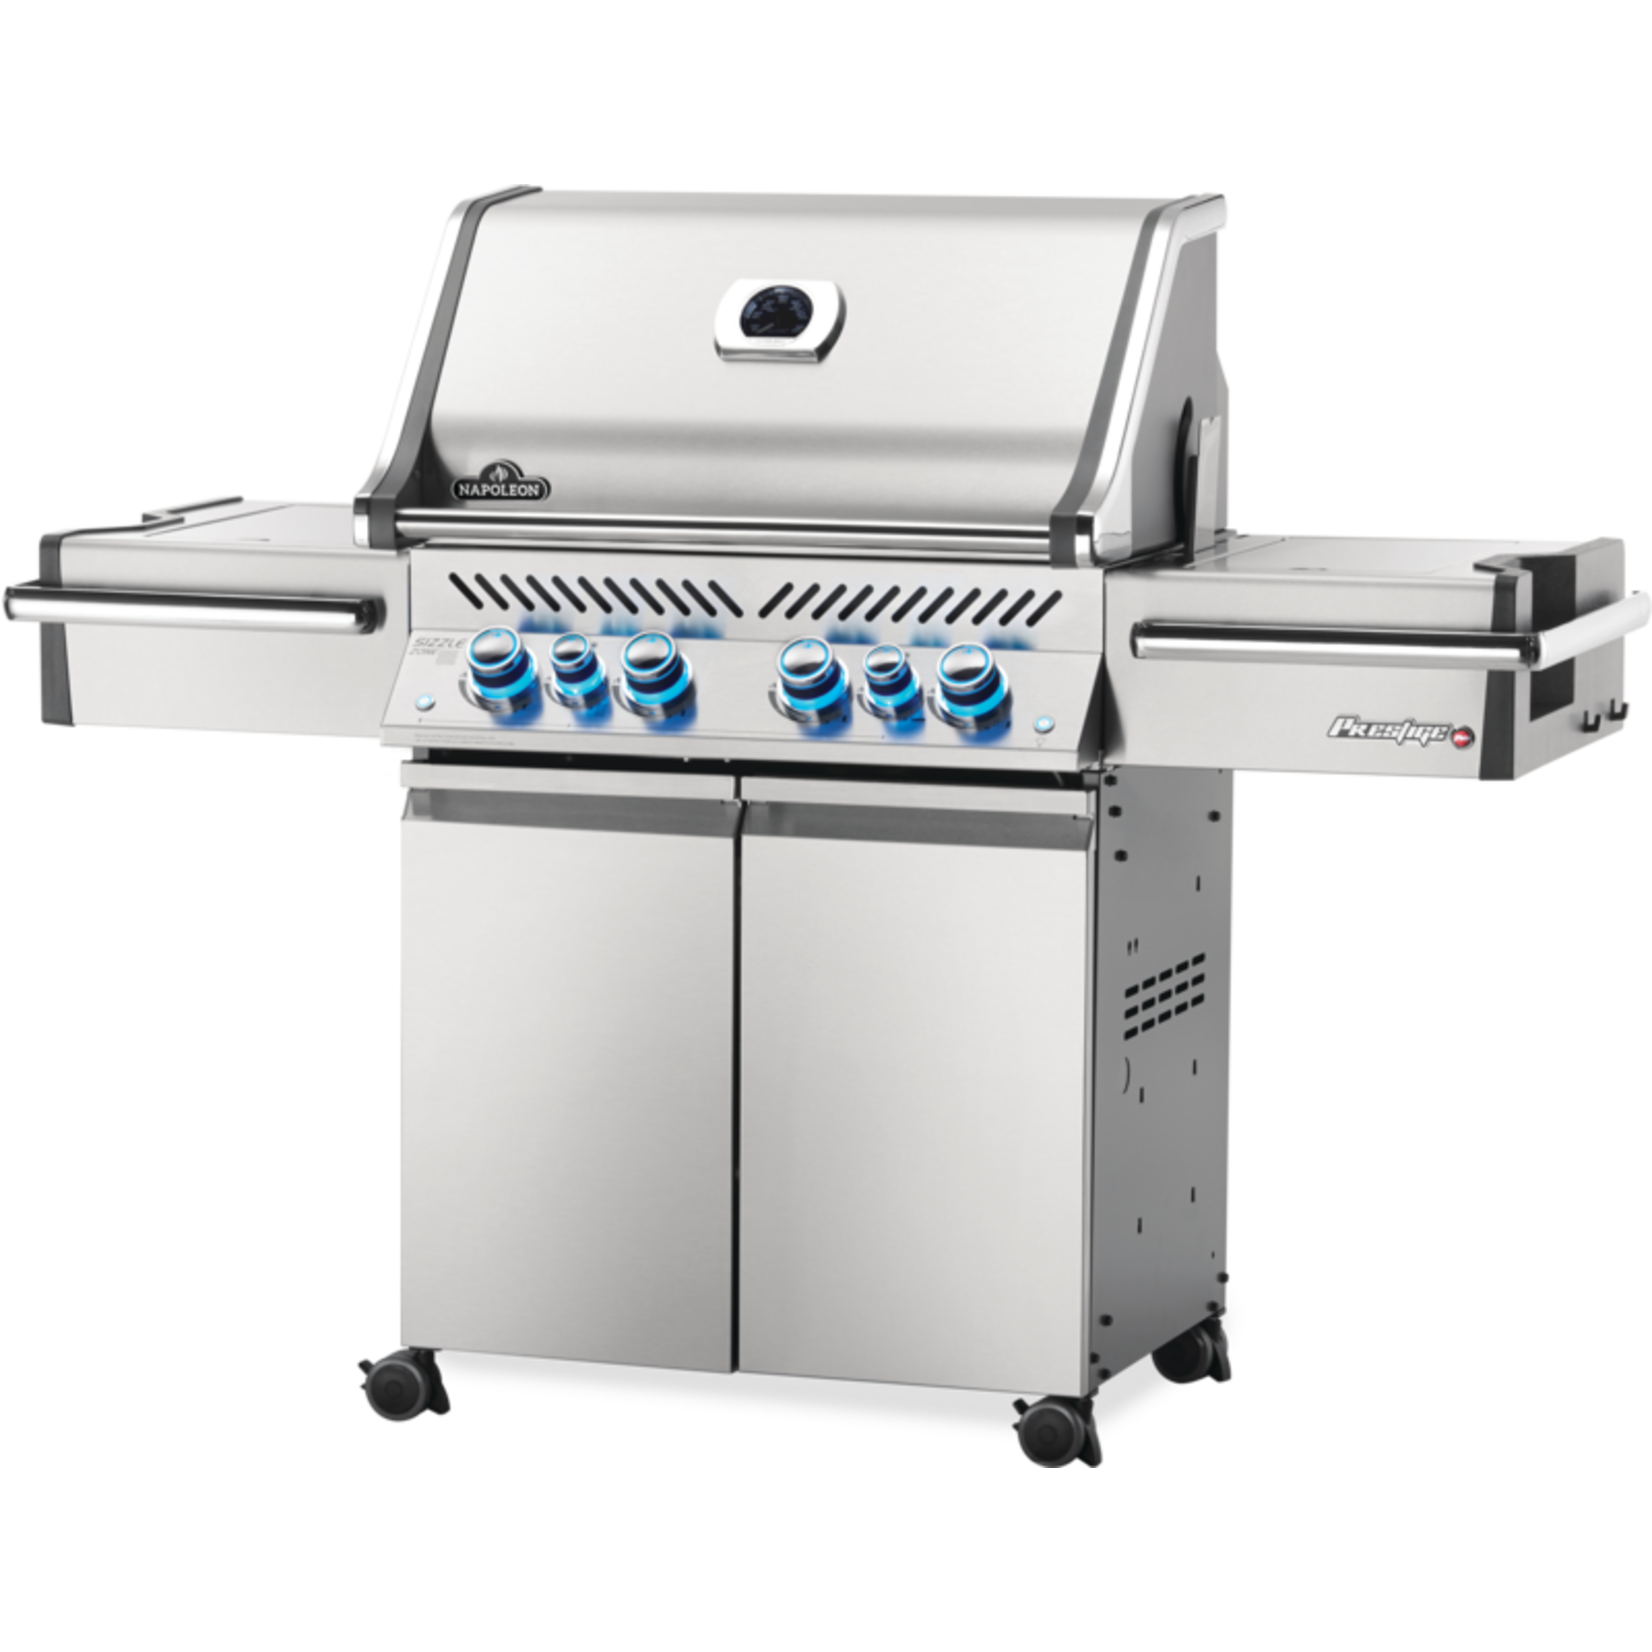 napoleon-prestige-pro-500-natural-gas-grill-with-infrared-rear-and